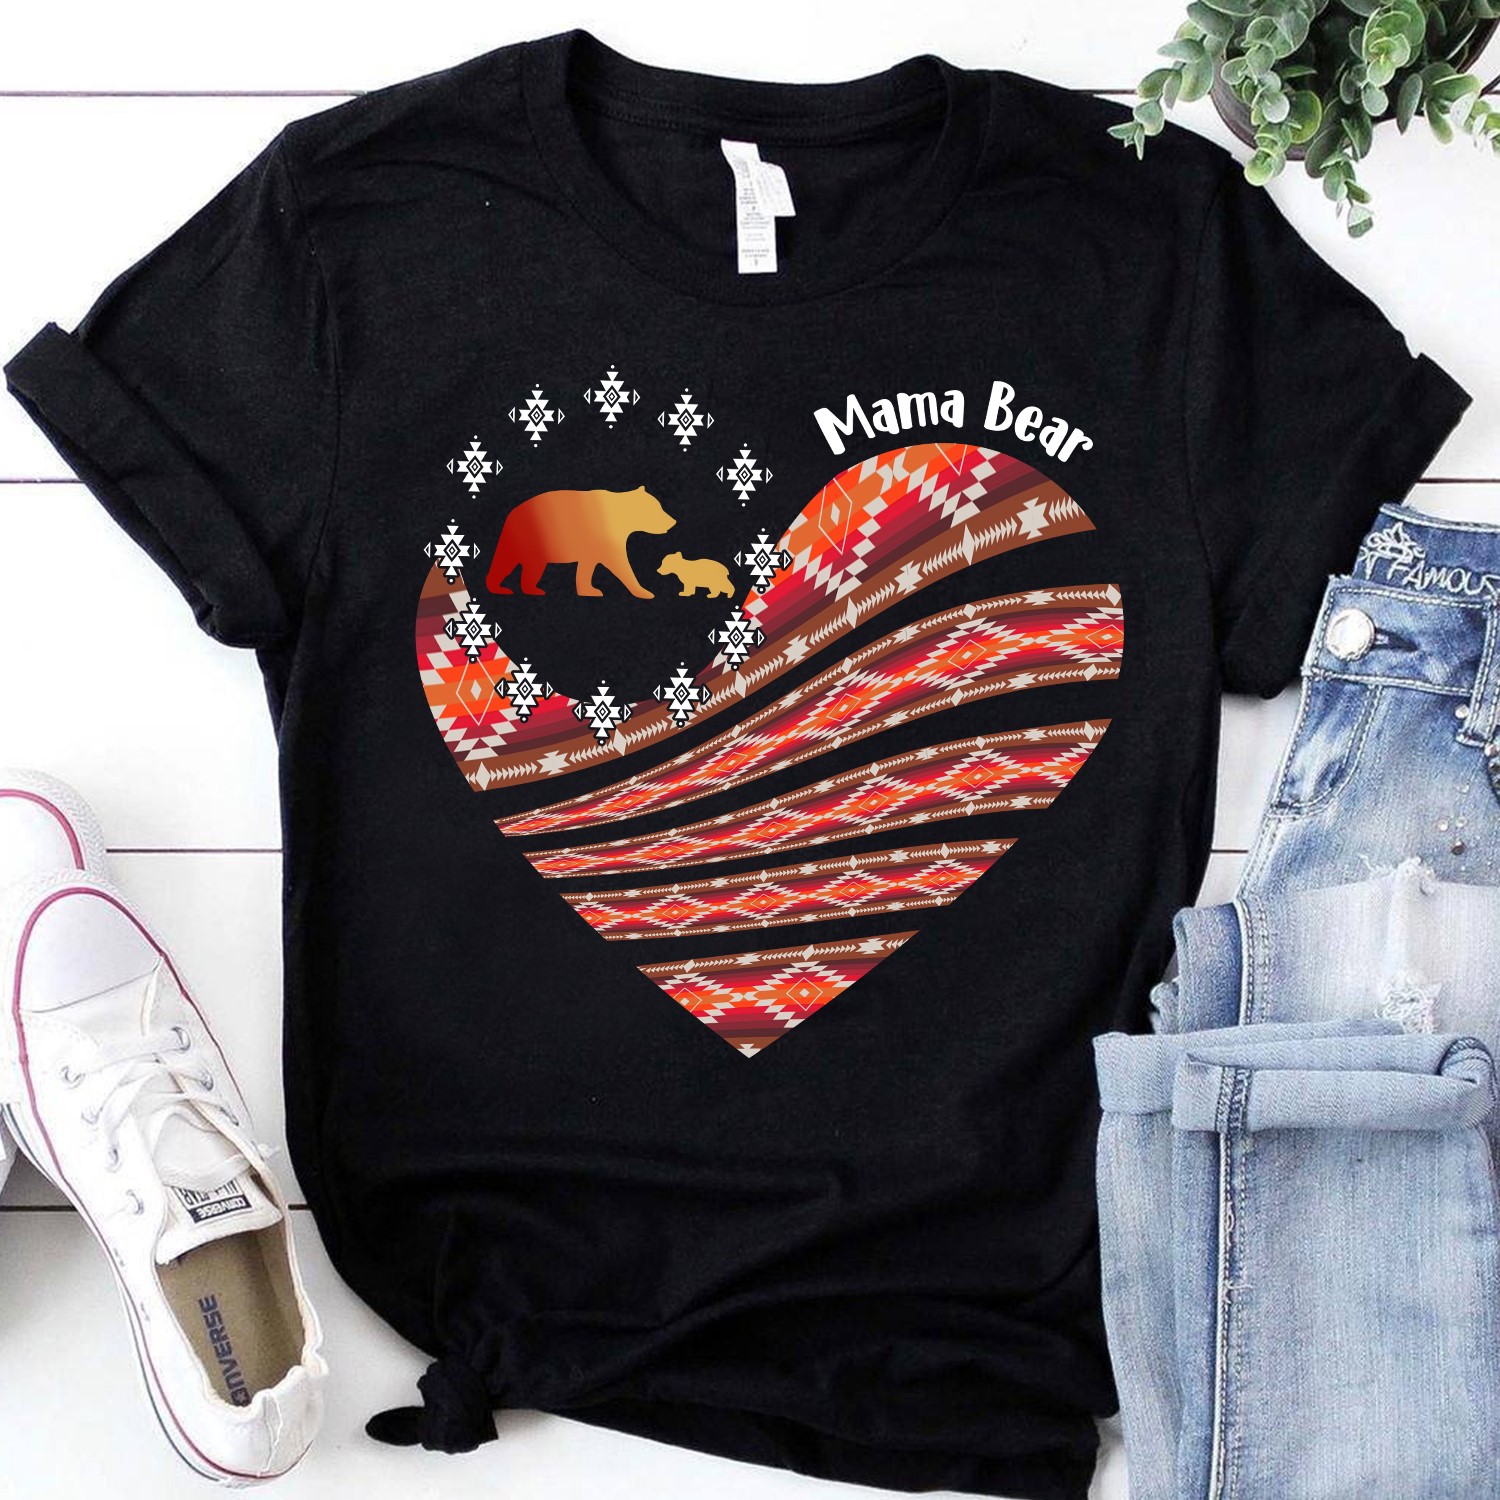 Mama bear, bear lover - Mother's day gift